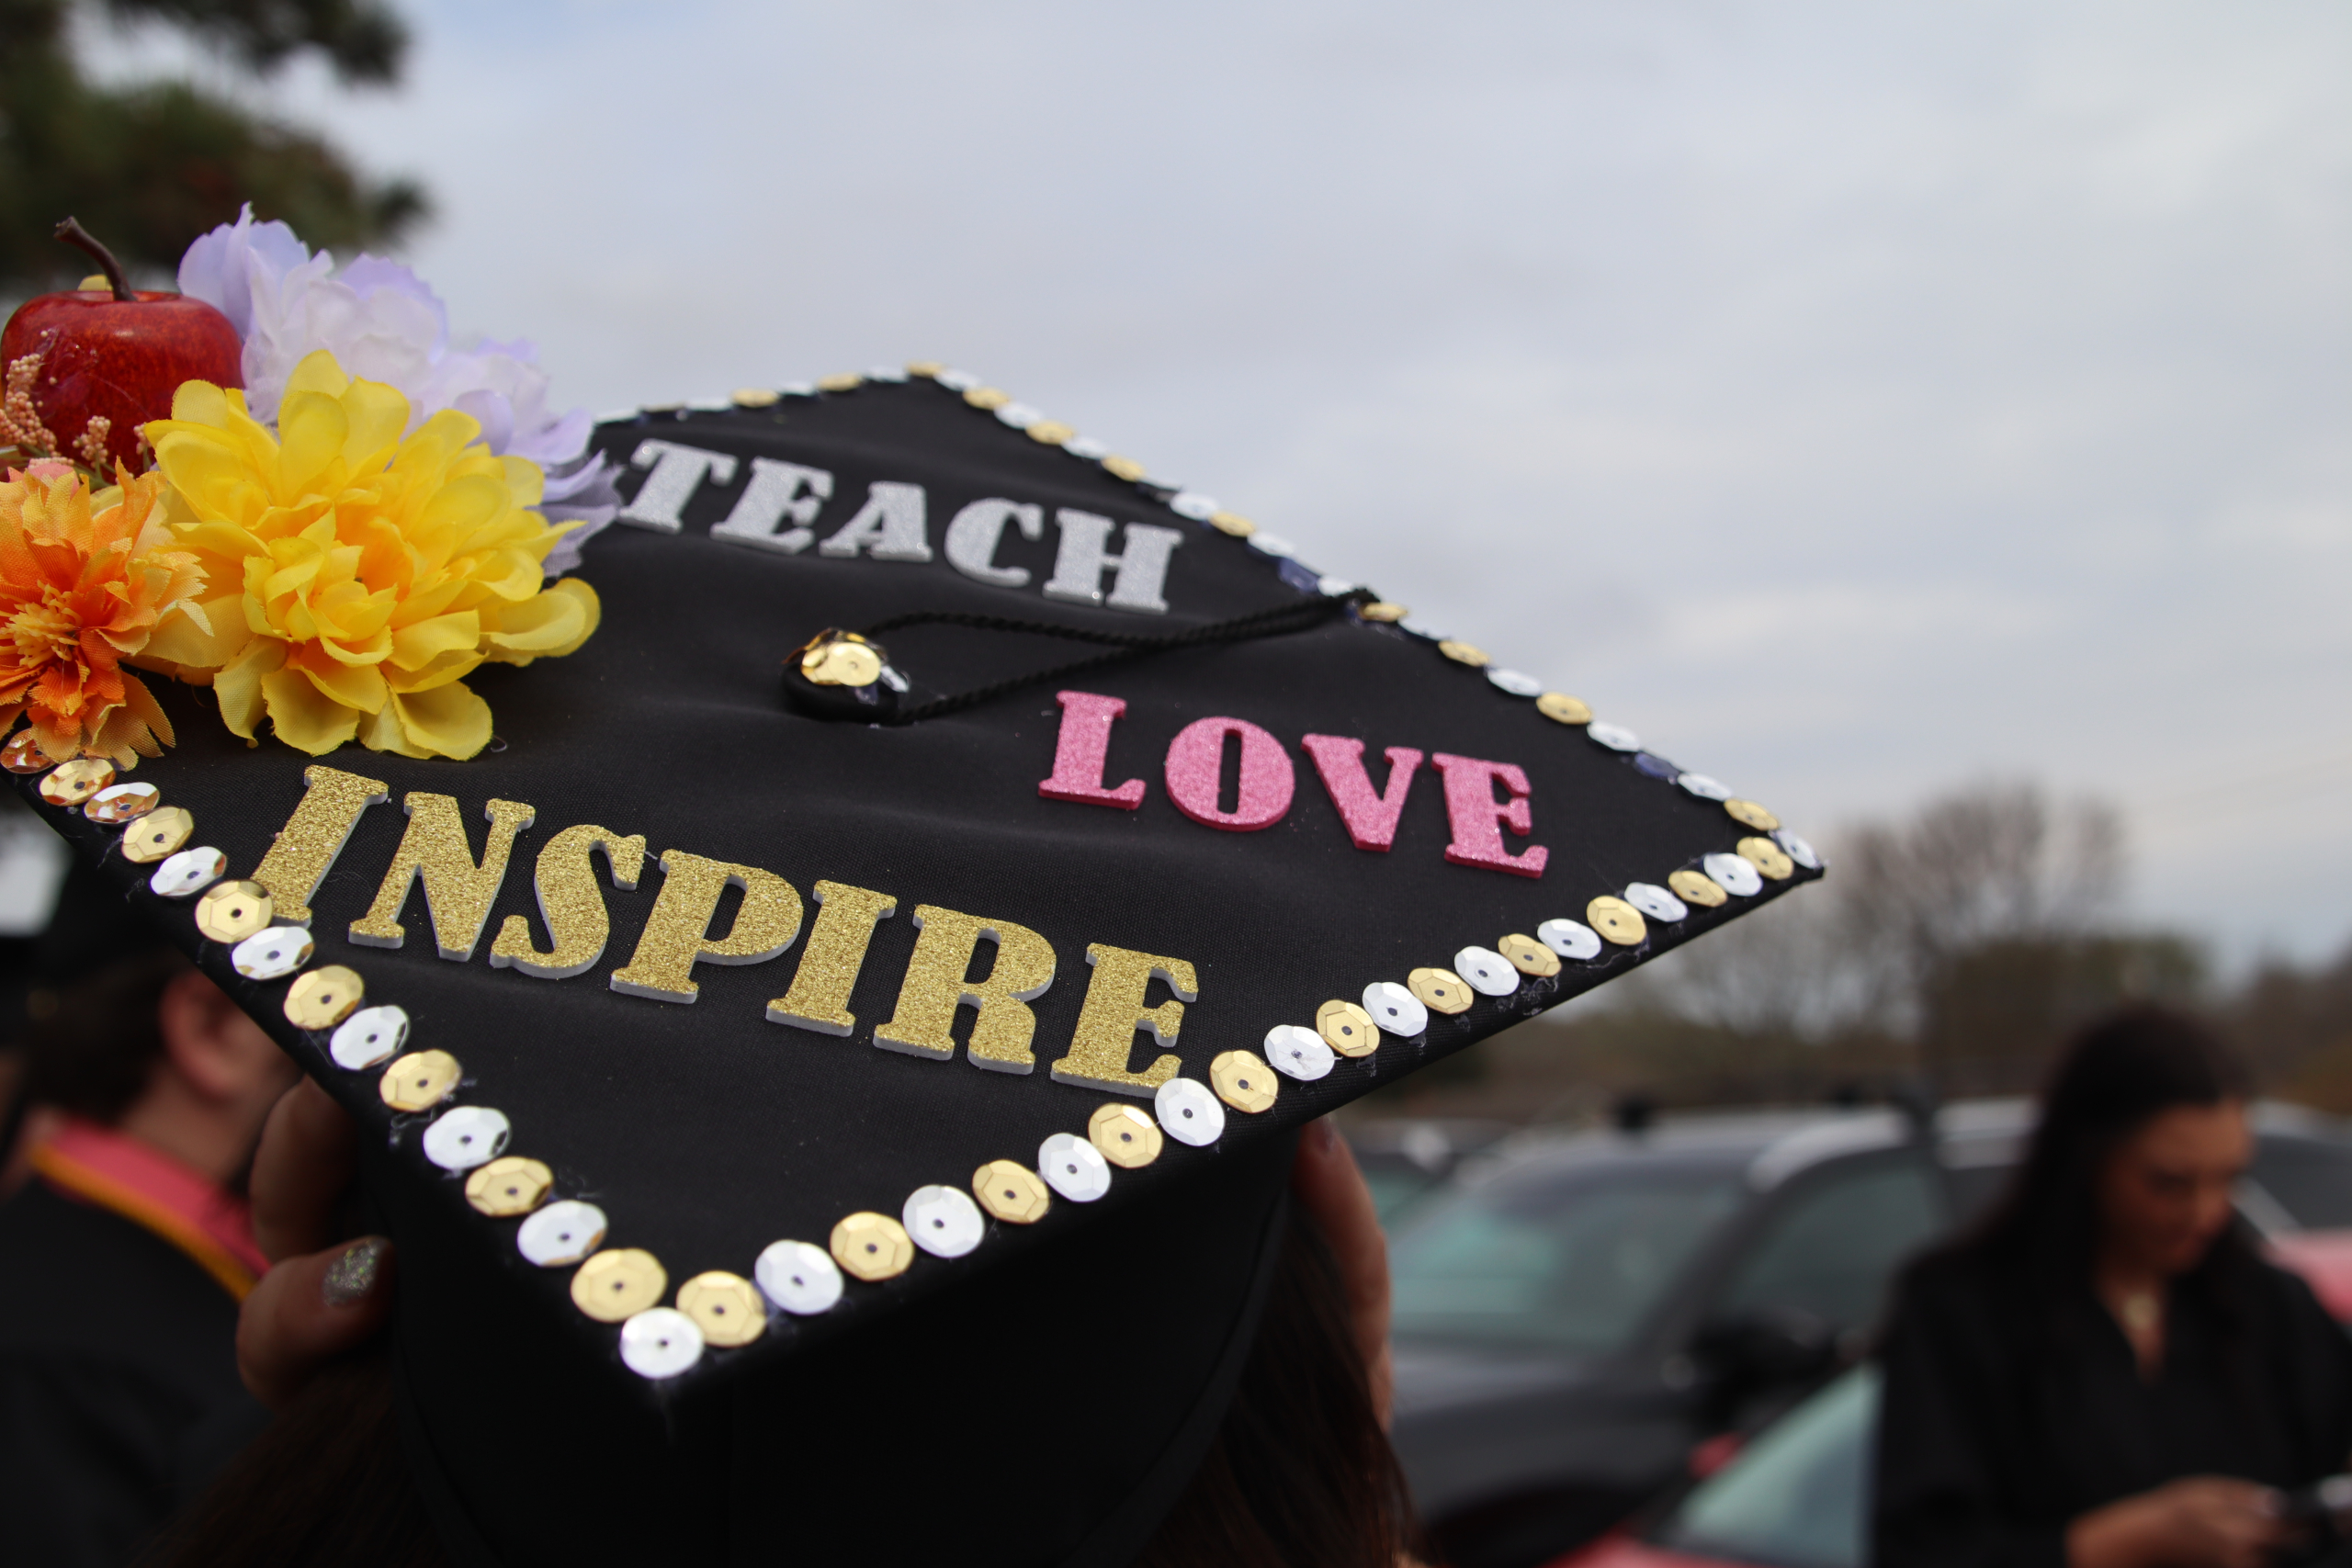 A graduation board with Teach, Love, Inspire written on the top.